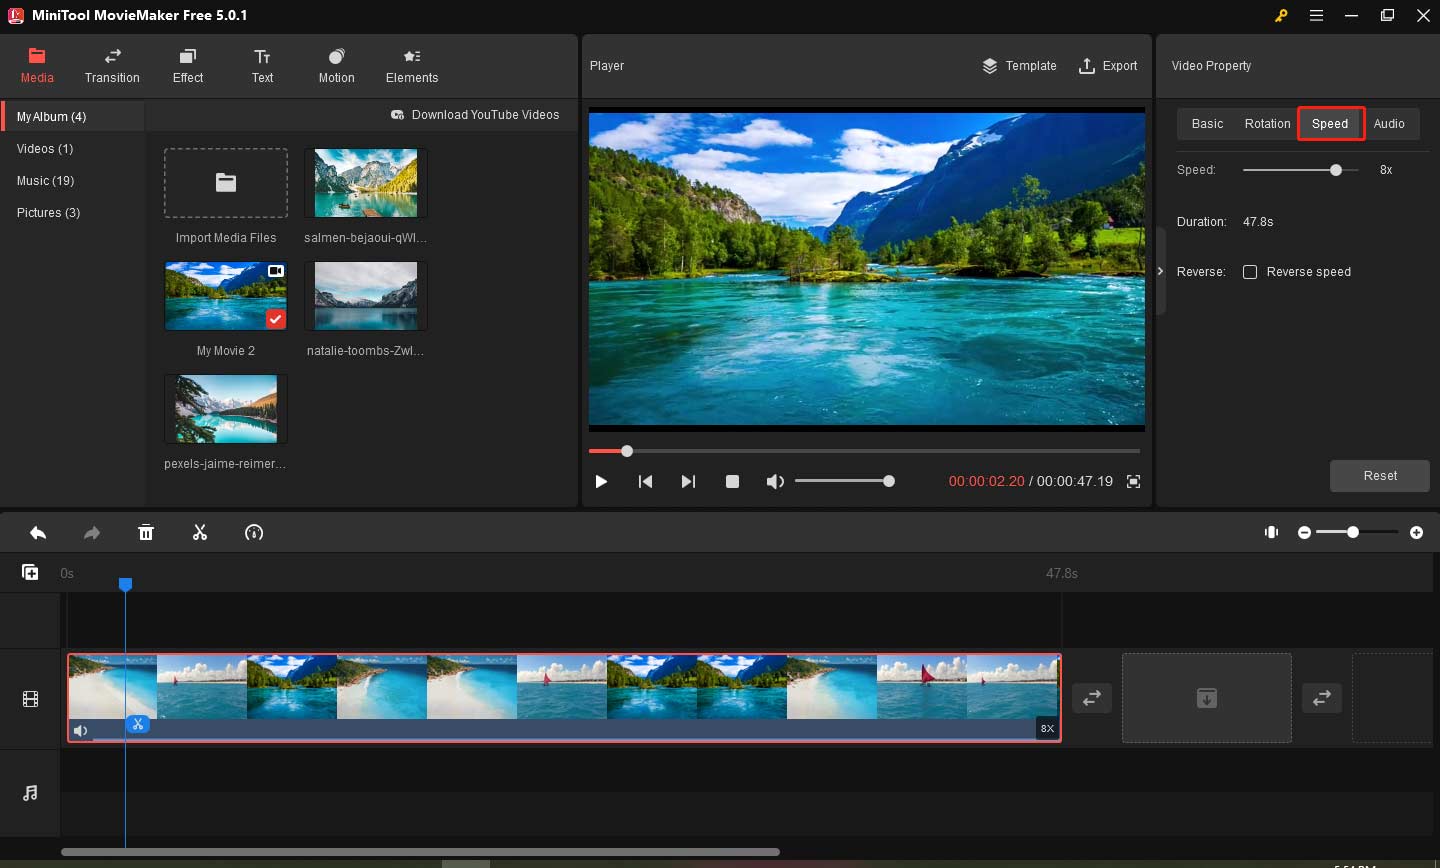 speed up a video in MiniTool MovieMaker